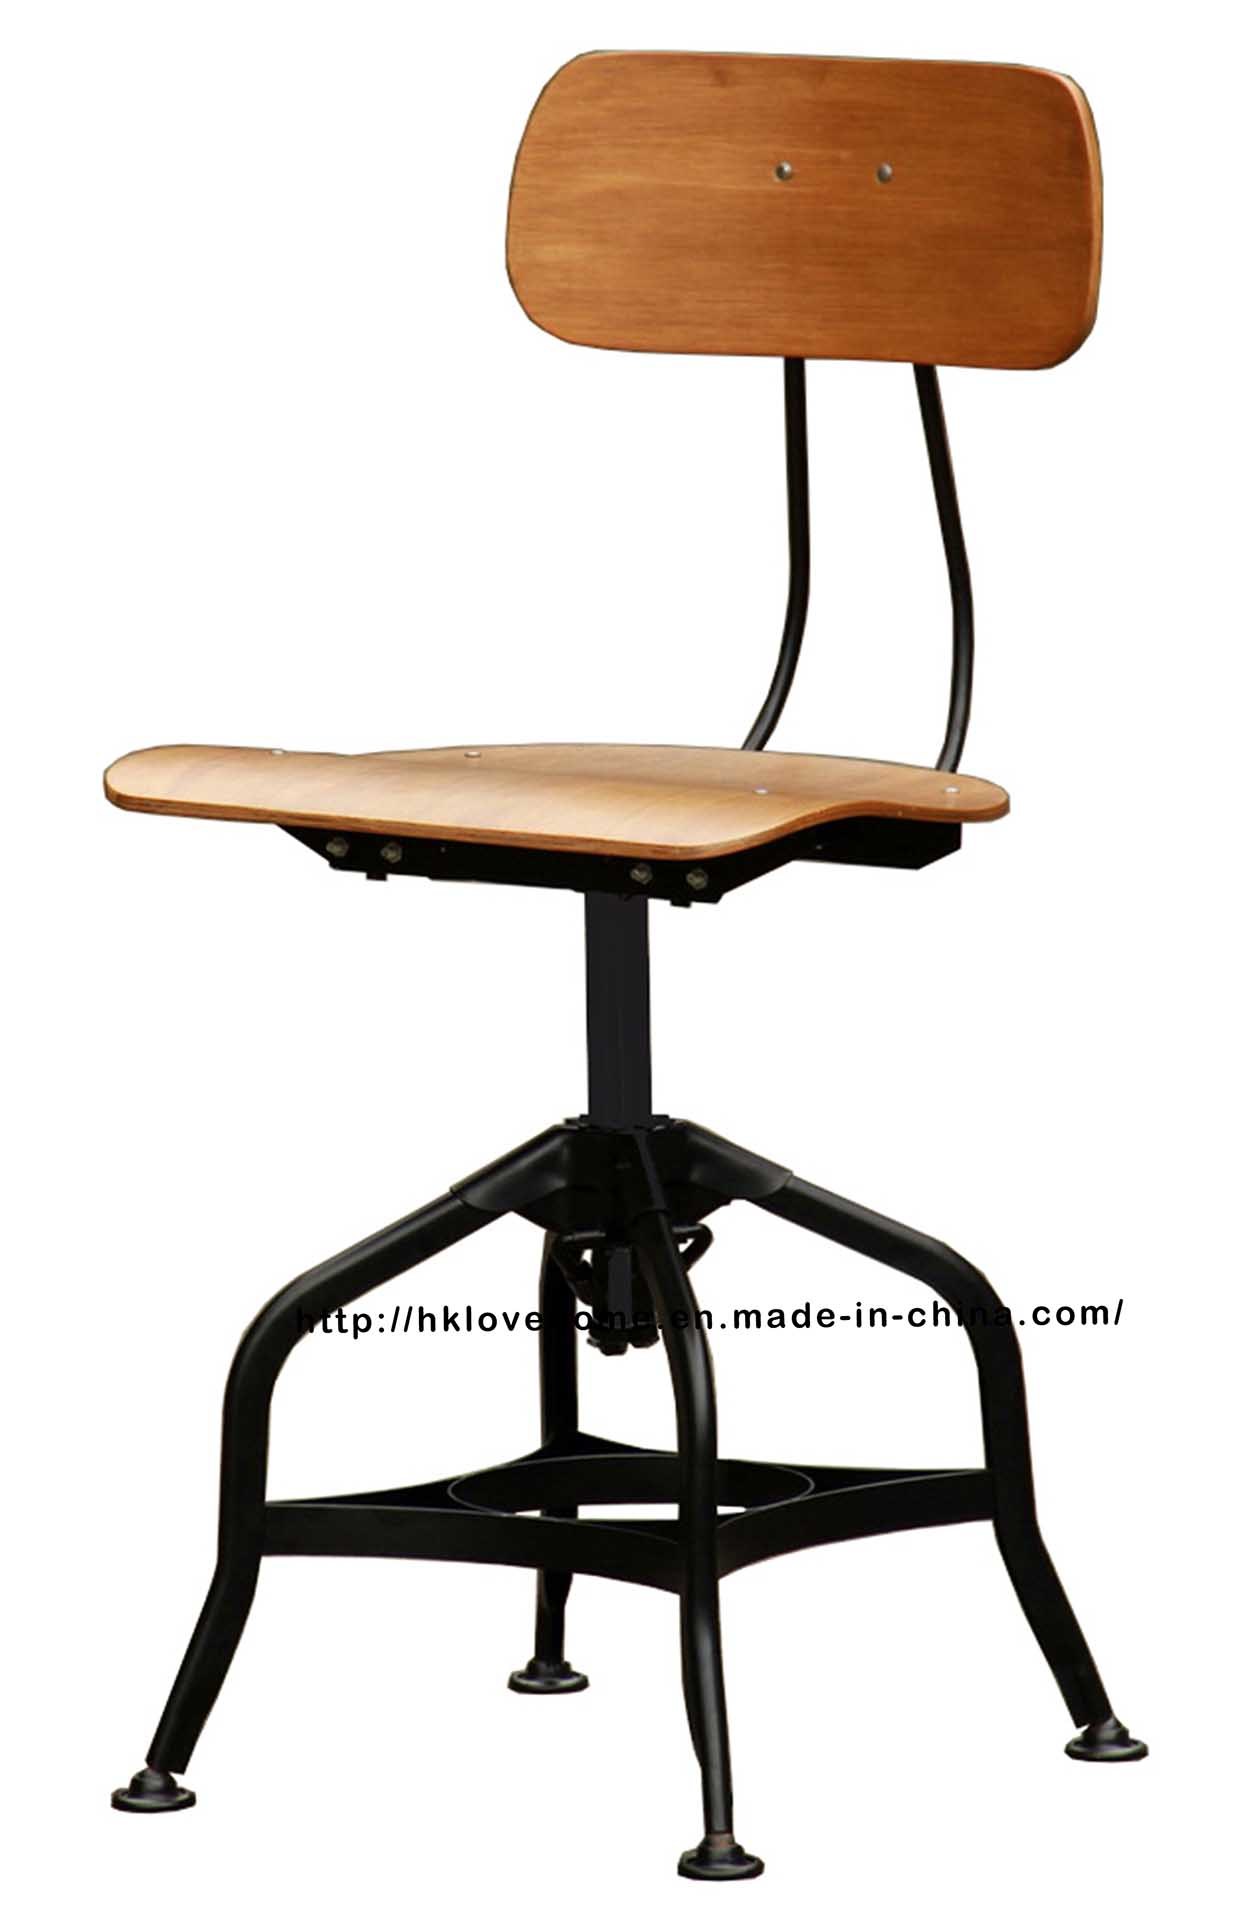 Industrial Classic Dining Vintage Toledo Wooden Chairs Barstools